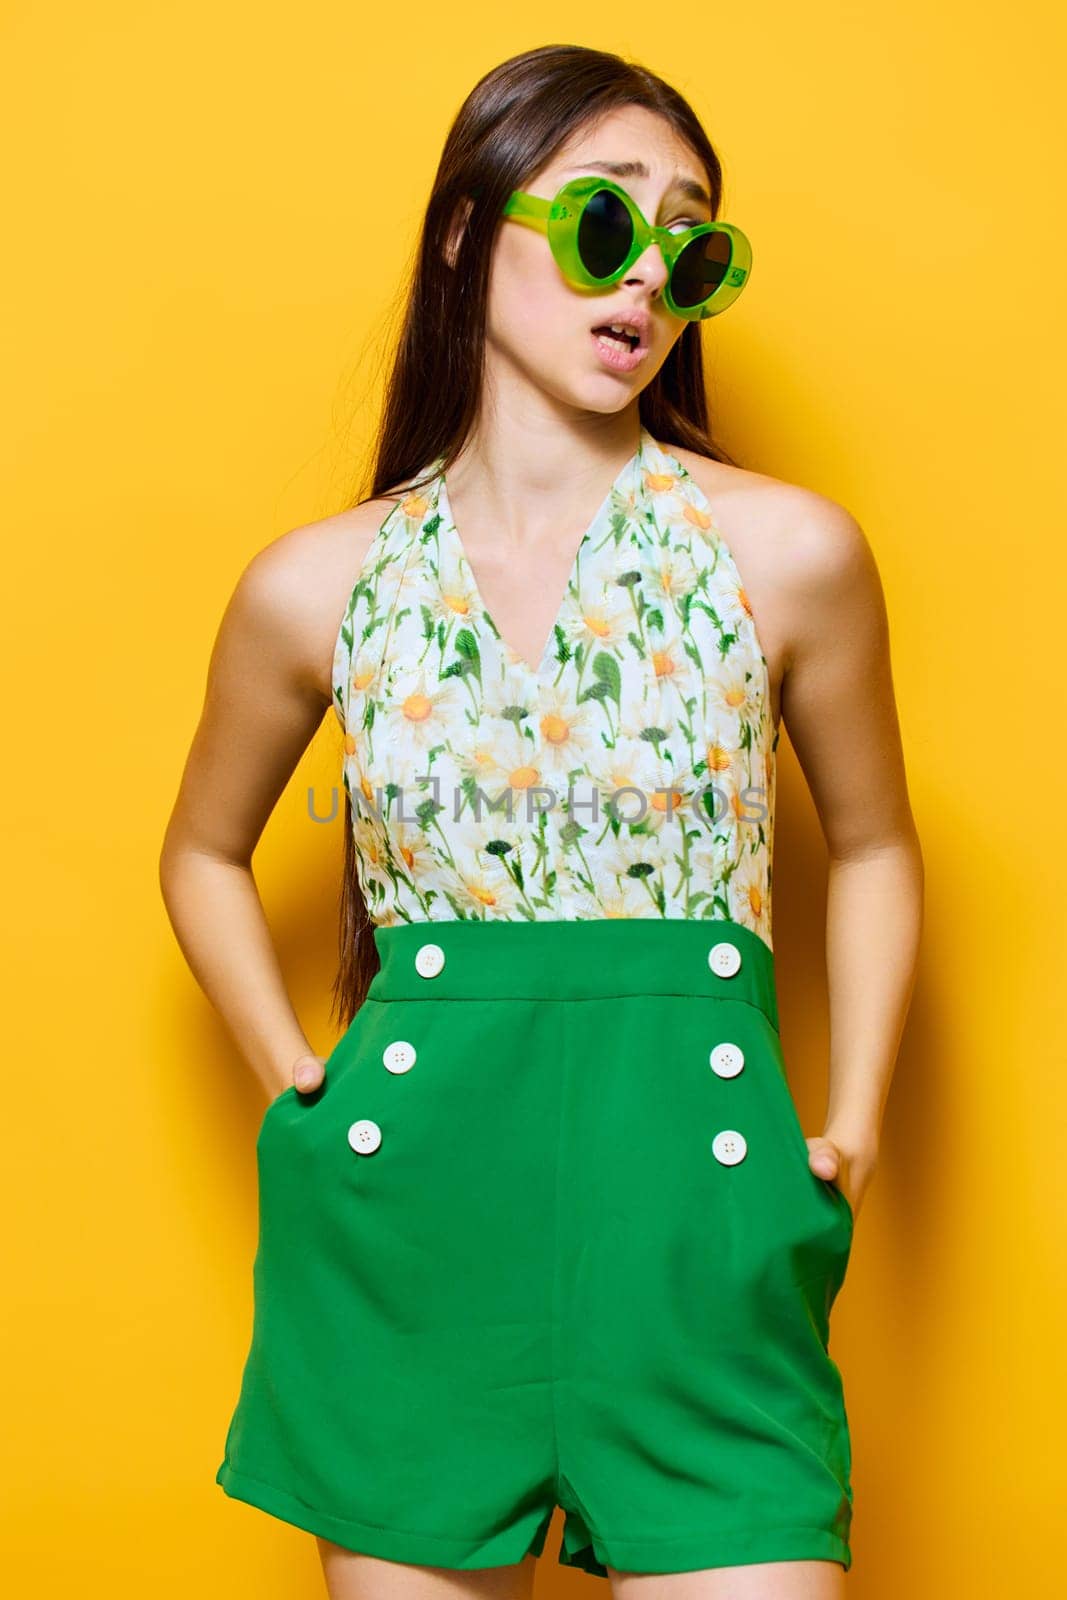 woman caucasian happy beautiful face attractive model jumpsuit smile style stylish young yellow brunet outfit sunglasses fashionable emotion beauty expression fashion